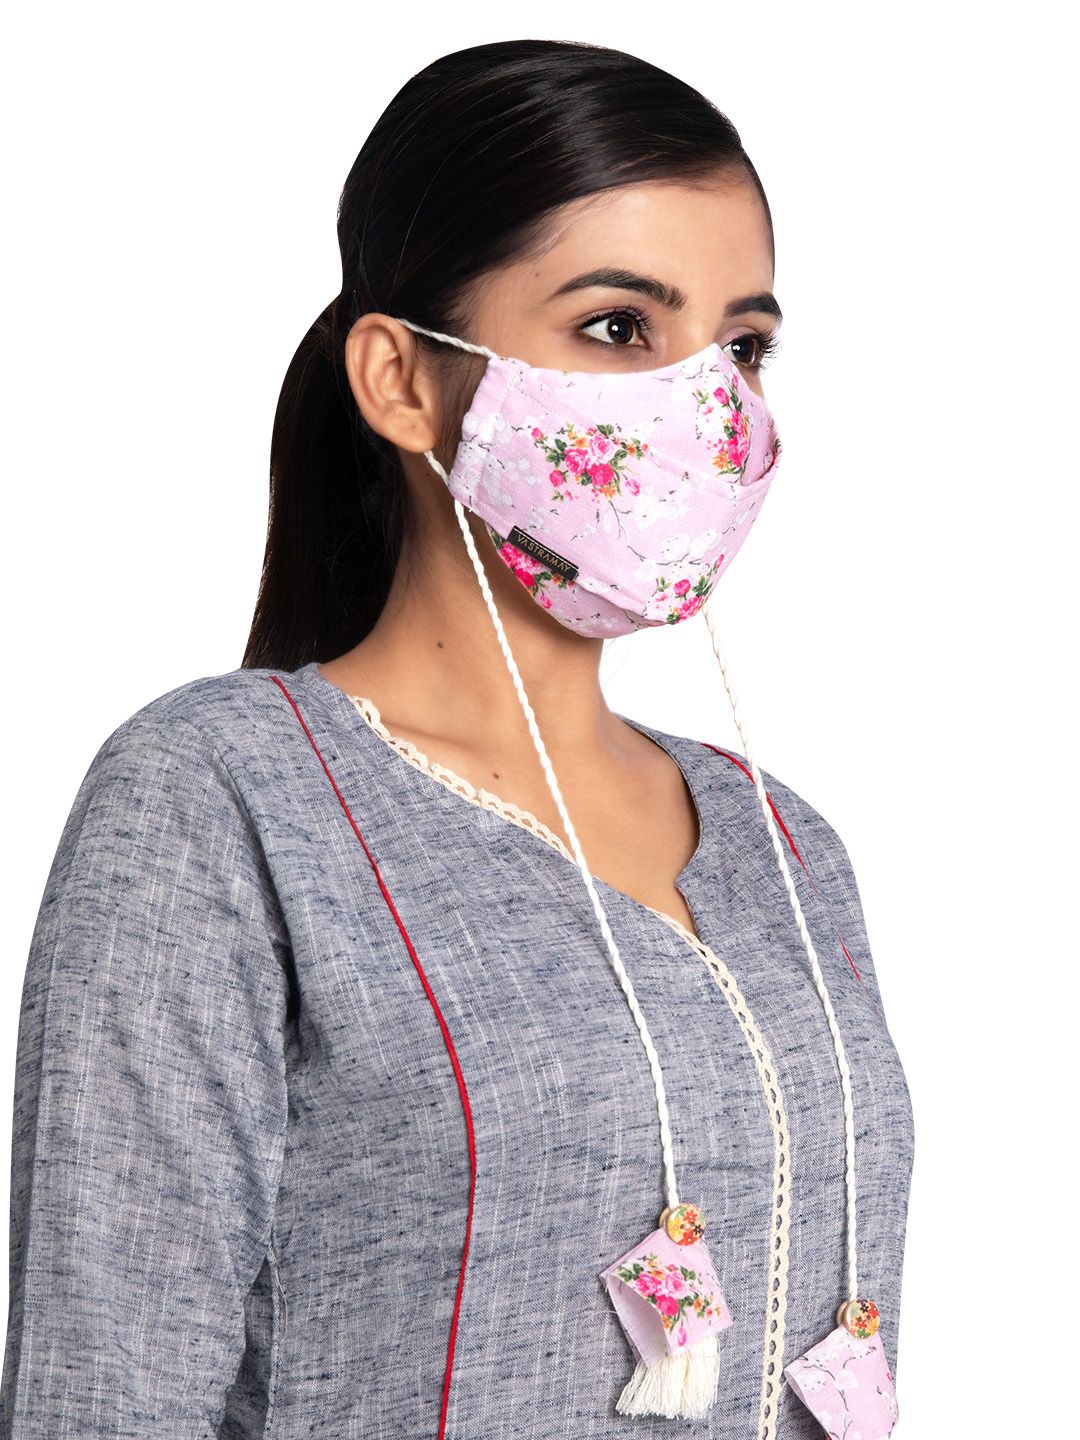 VASTRAMAY Unisex 3 Ply Protective Outdoor Face Masks Price in India